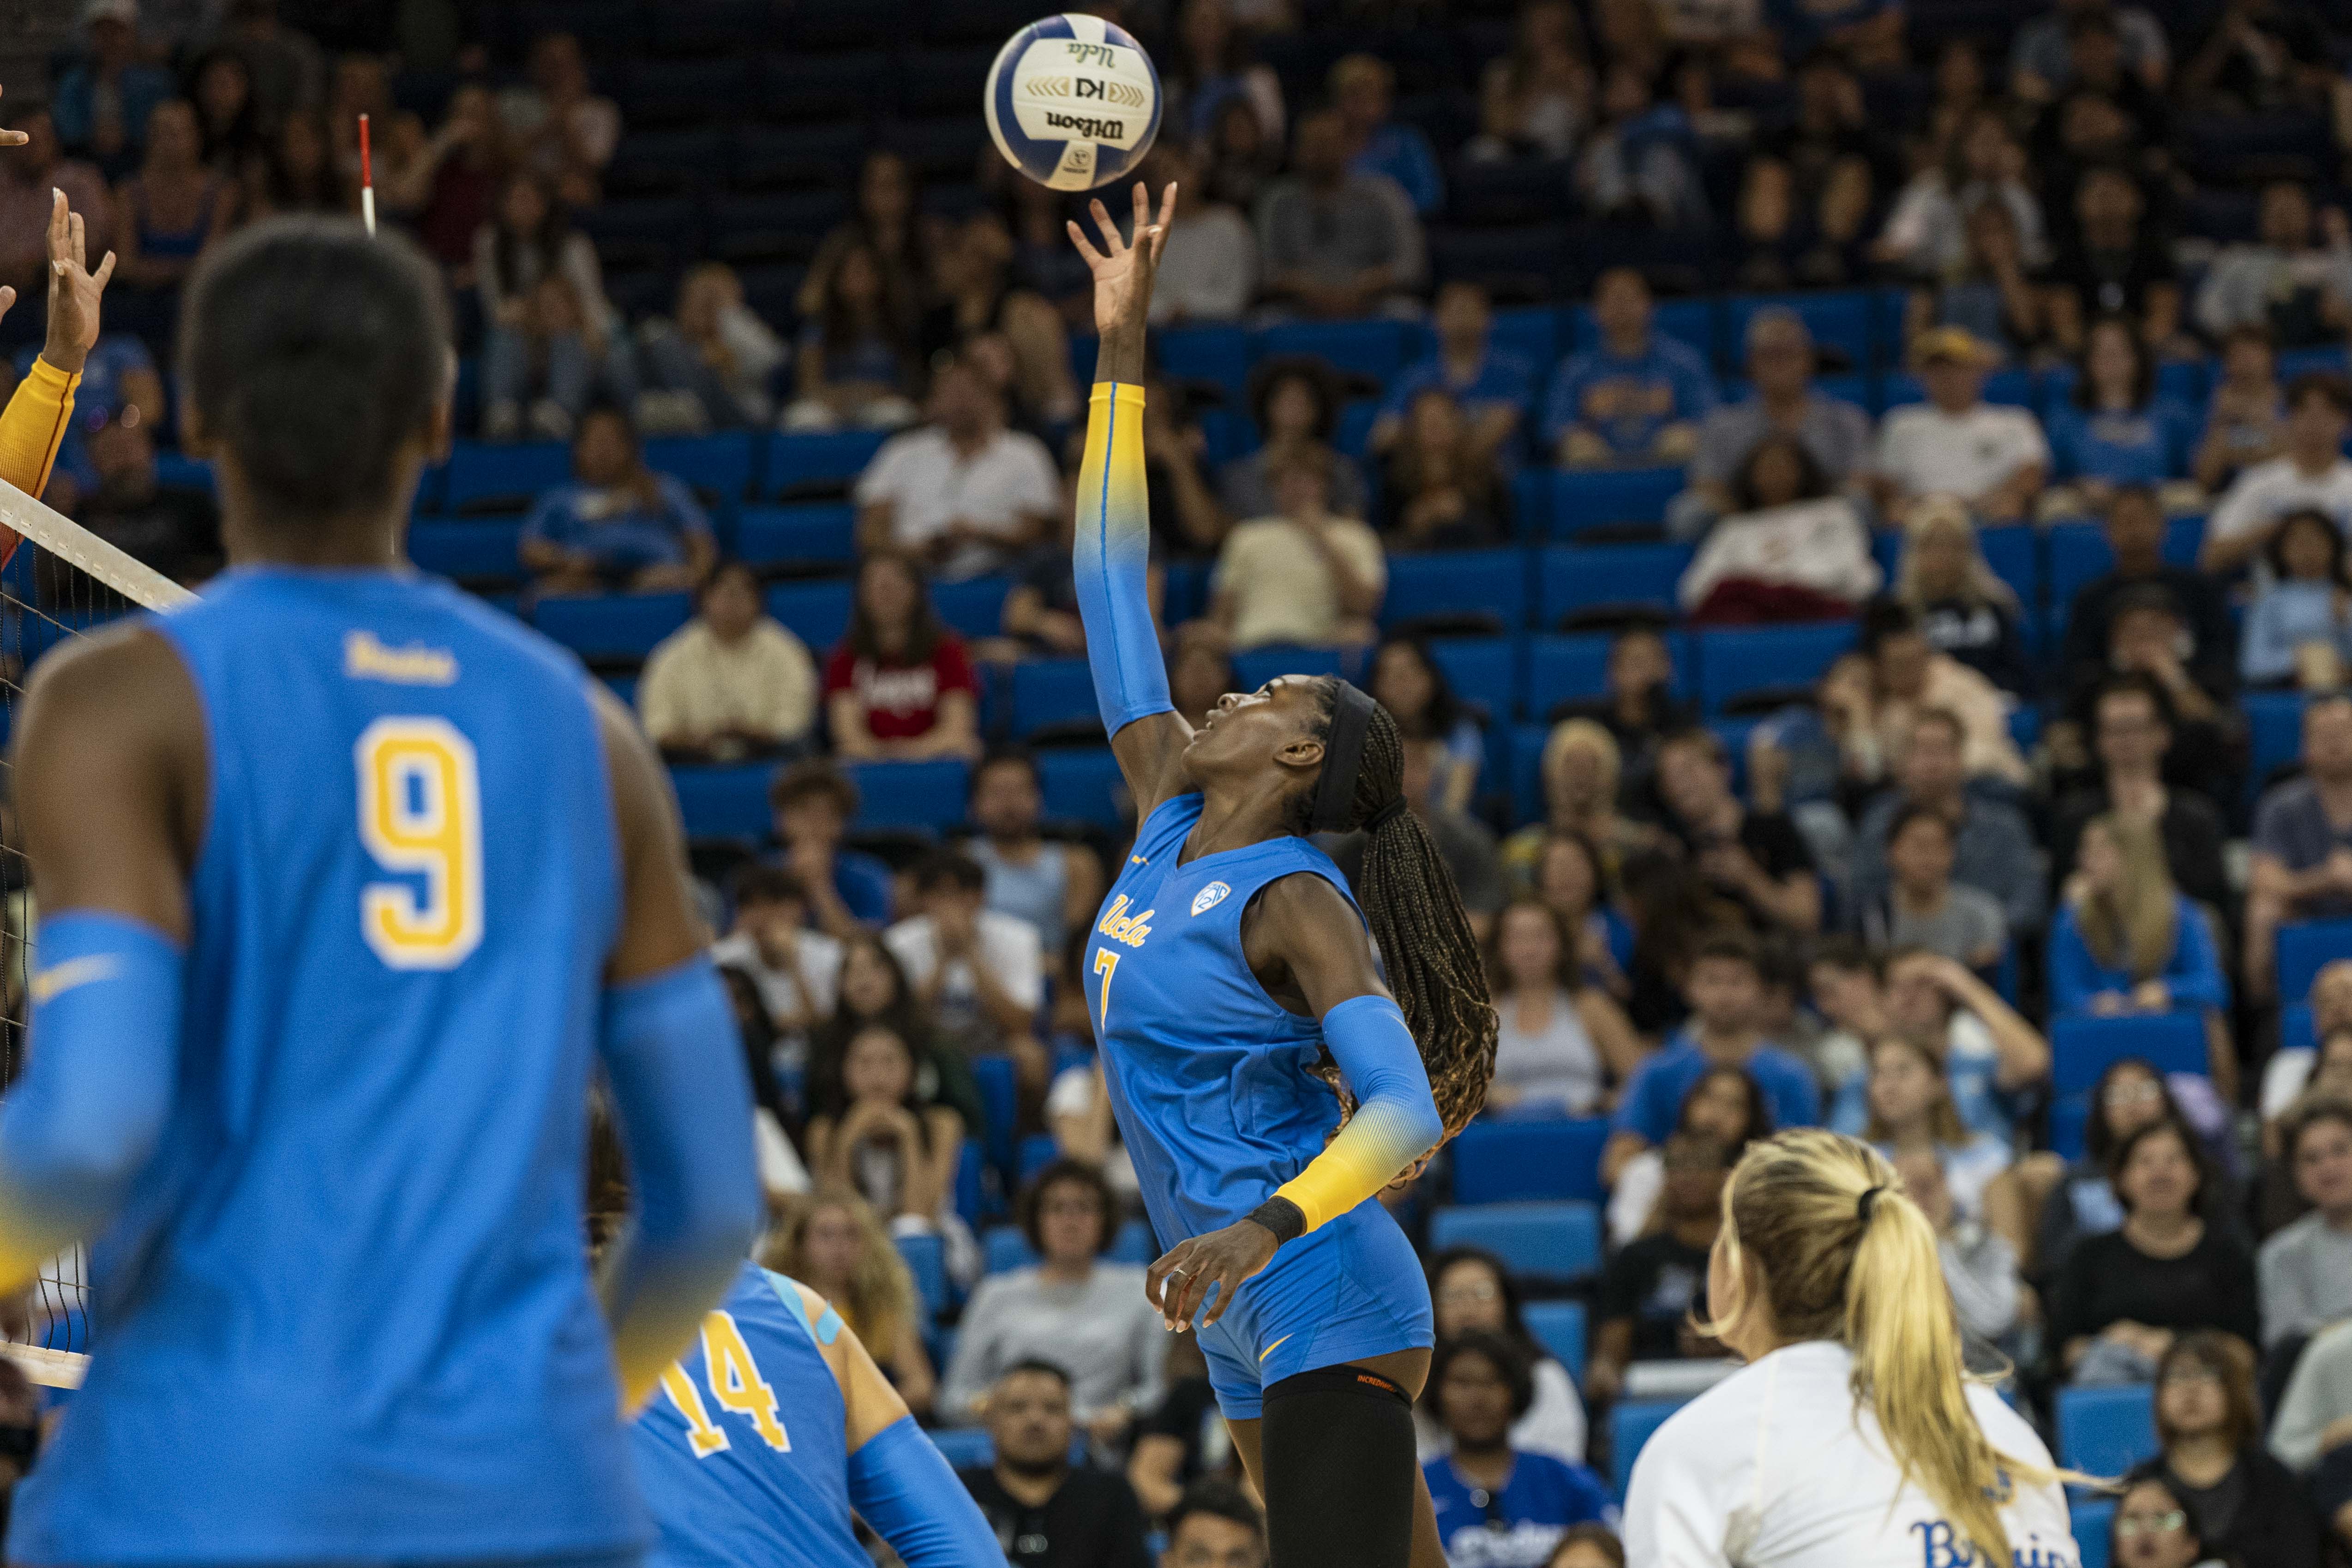 UCLA womens volleyball perfects strategy for home game win following two losses